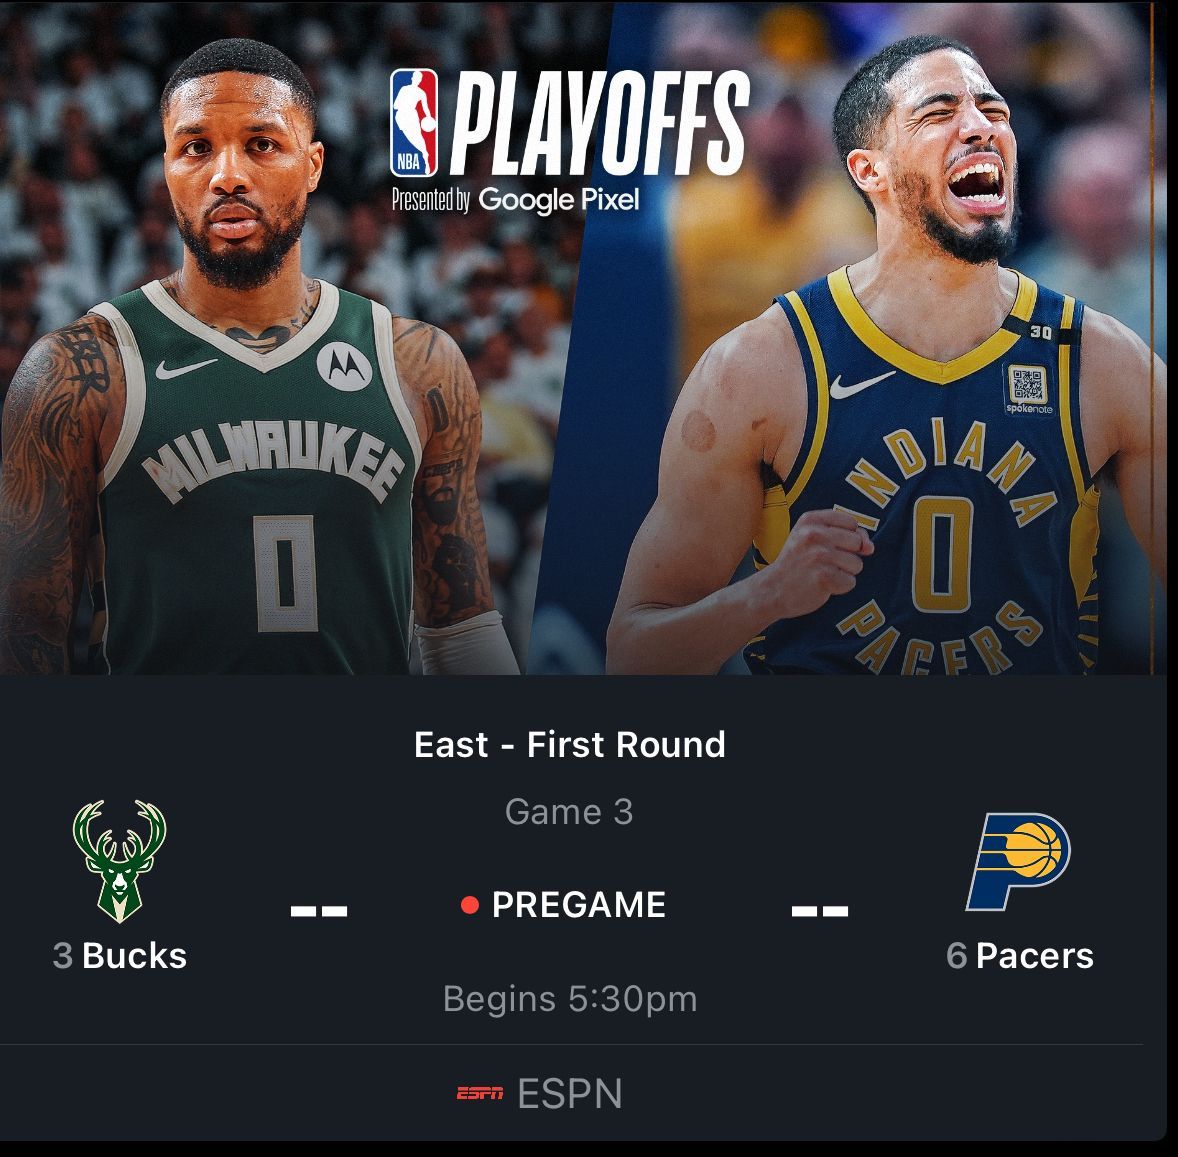 Just a reminder… We have an NBA playoff game in 5 minutes 😅